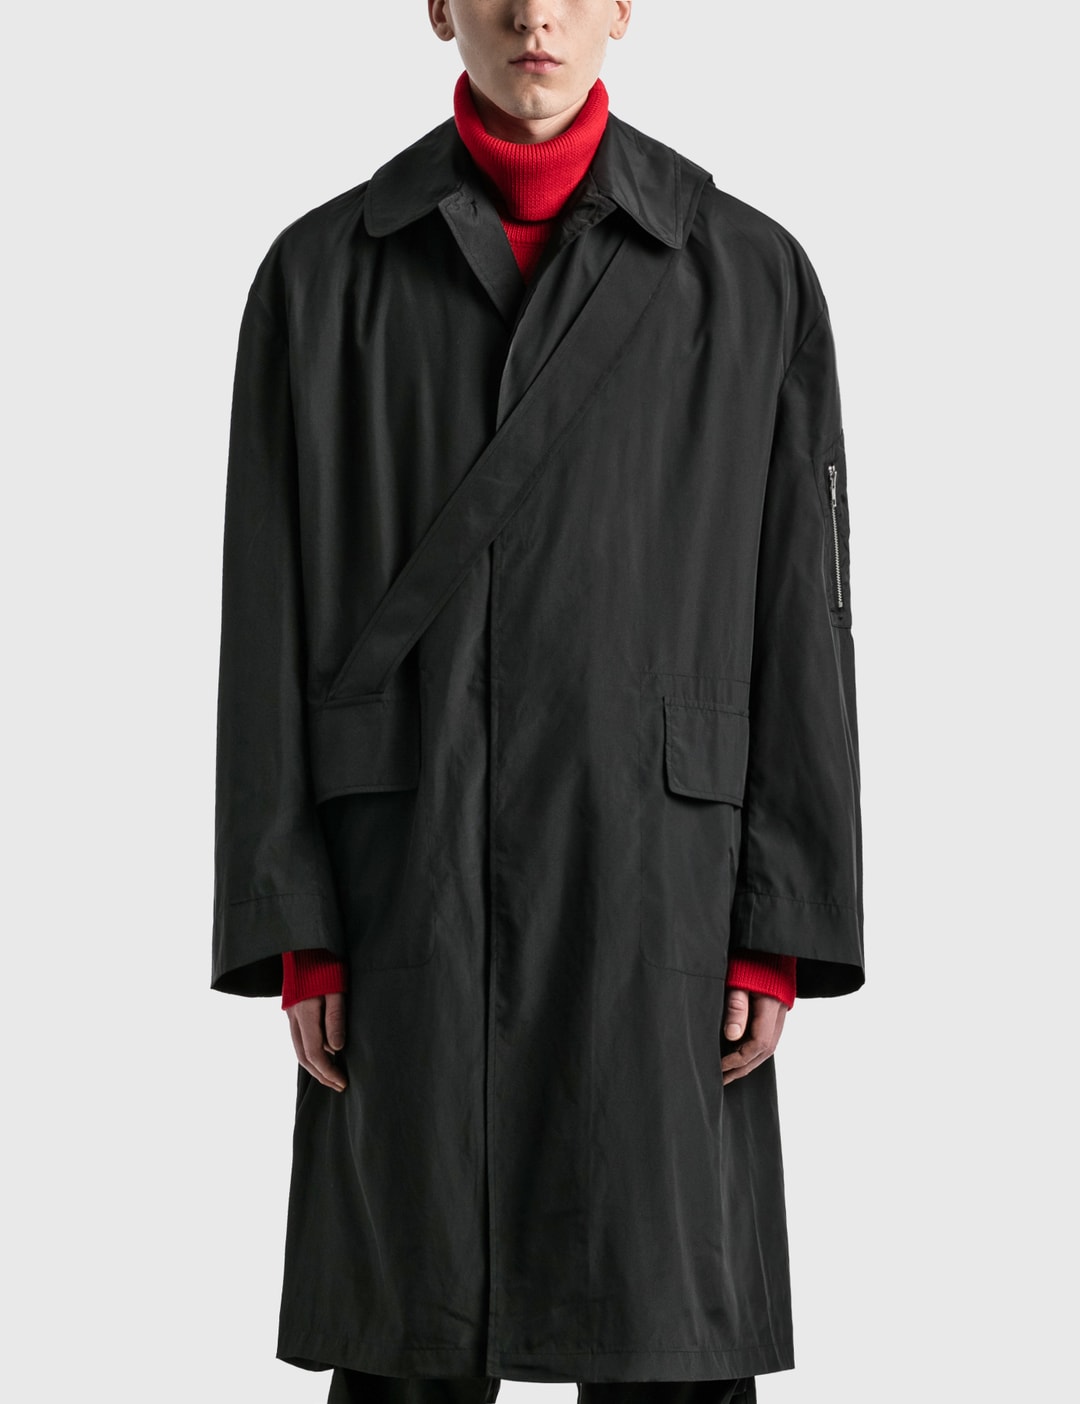 Random Identities - Satin Overcoat | HBX - Globally Curated Fashion and ...